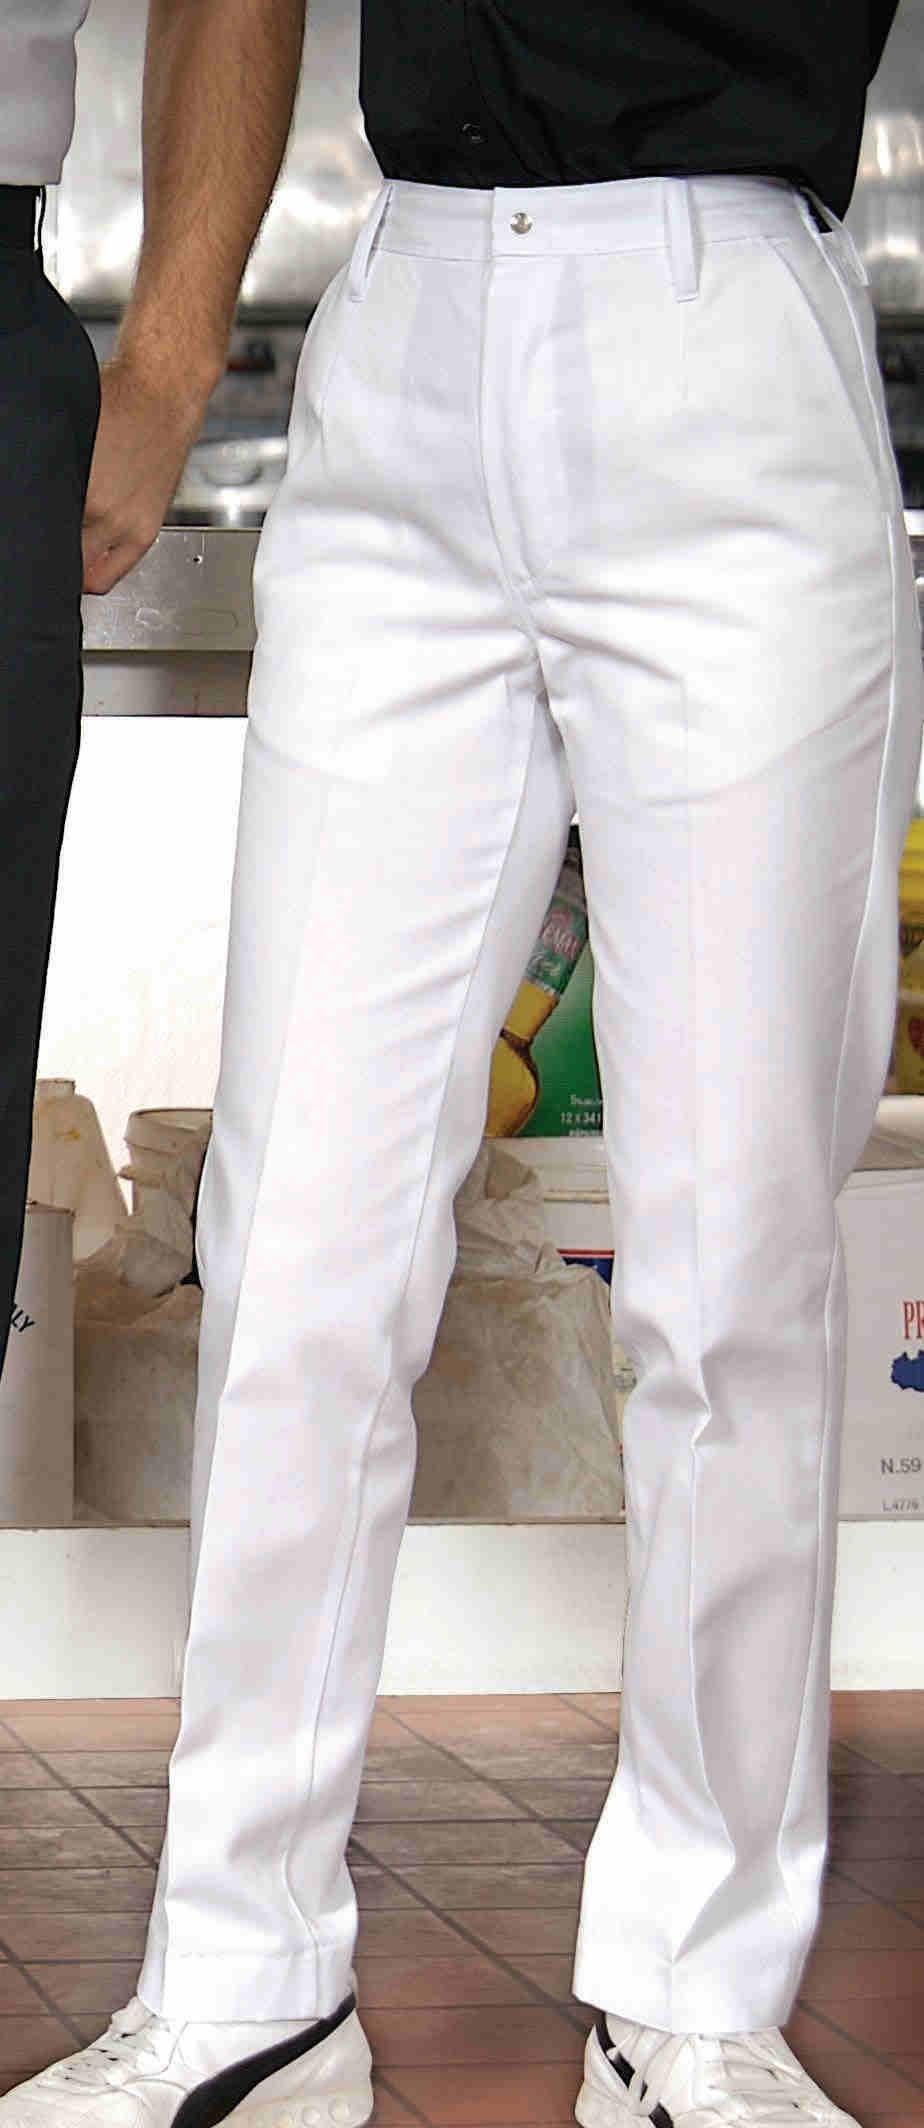 PLAIN FRONT CHEF PANTS We offer a wide range of chefs pants in colours and patterns that deliver sharp style and consistent comfort for every waistline.